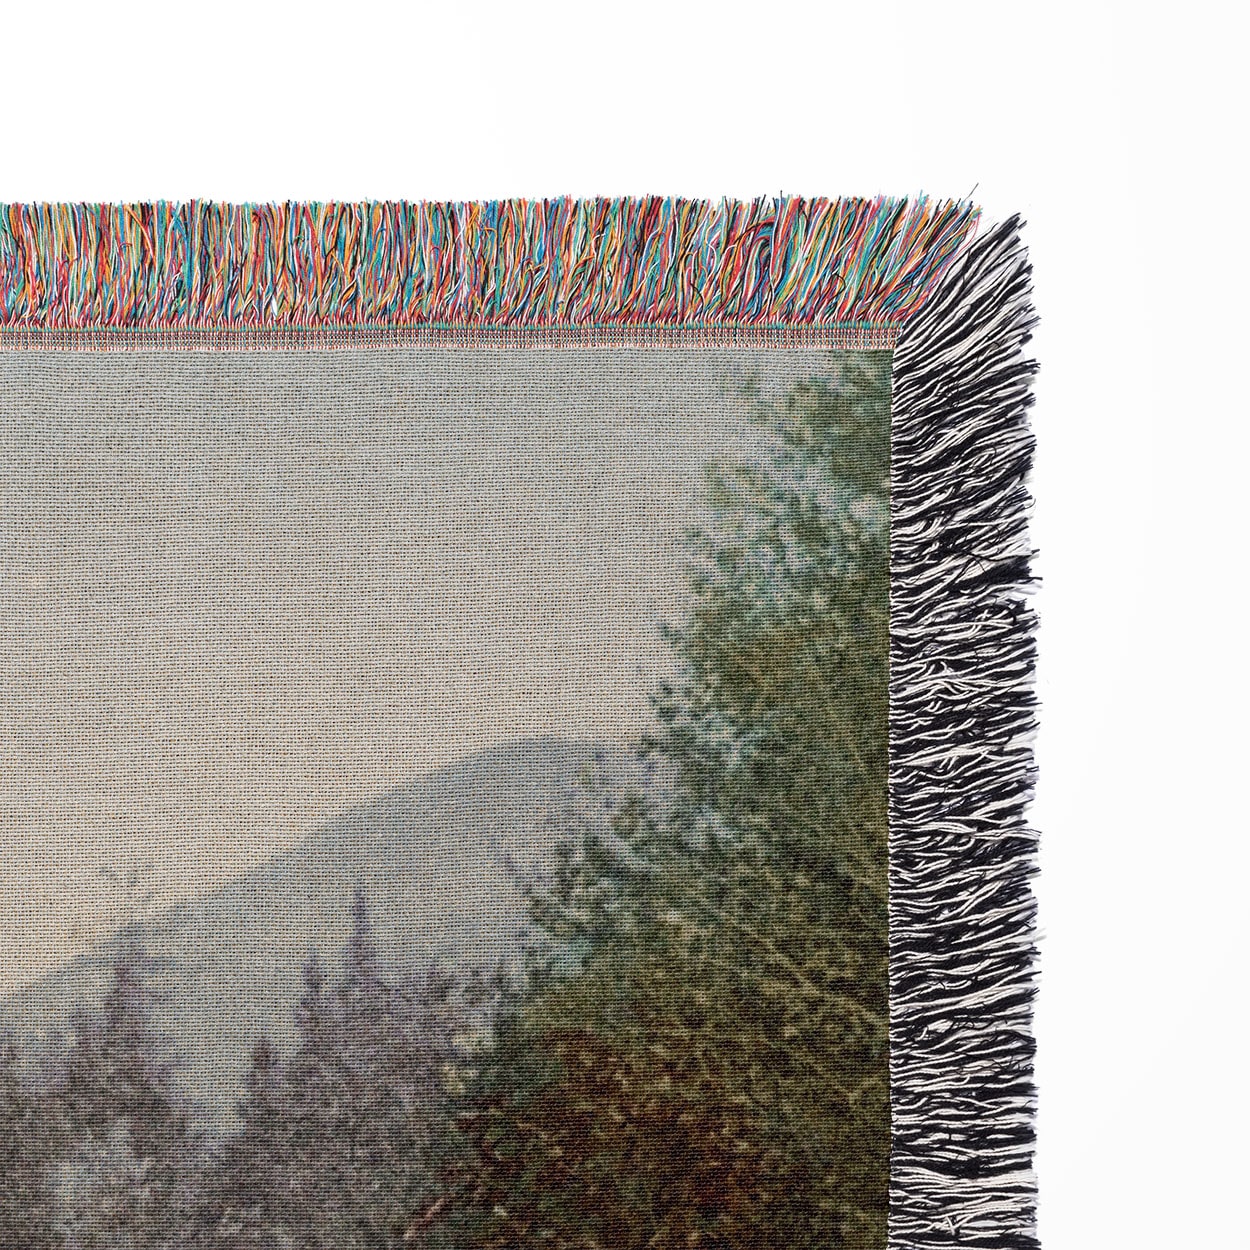 Mountain River Woven Blanket Woven Blanket Hanging on a Wall as Framed Wall Art